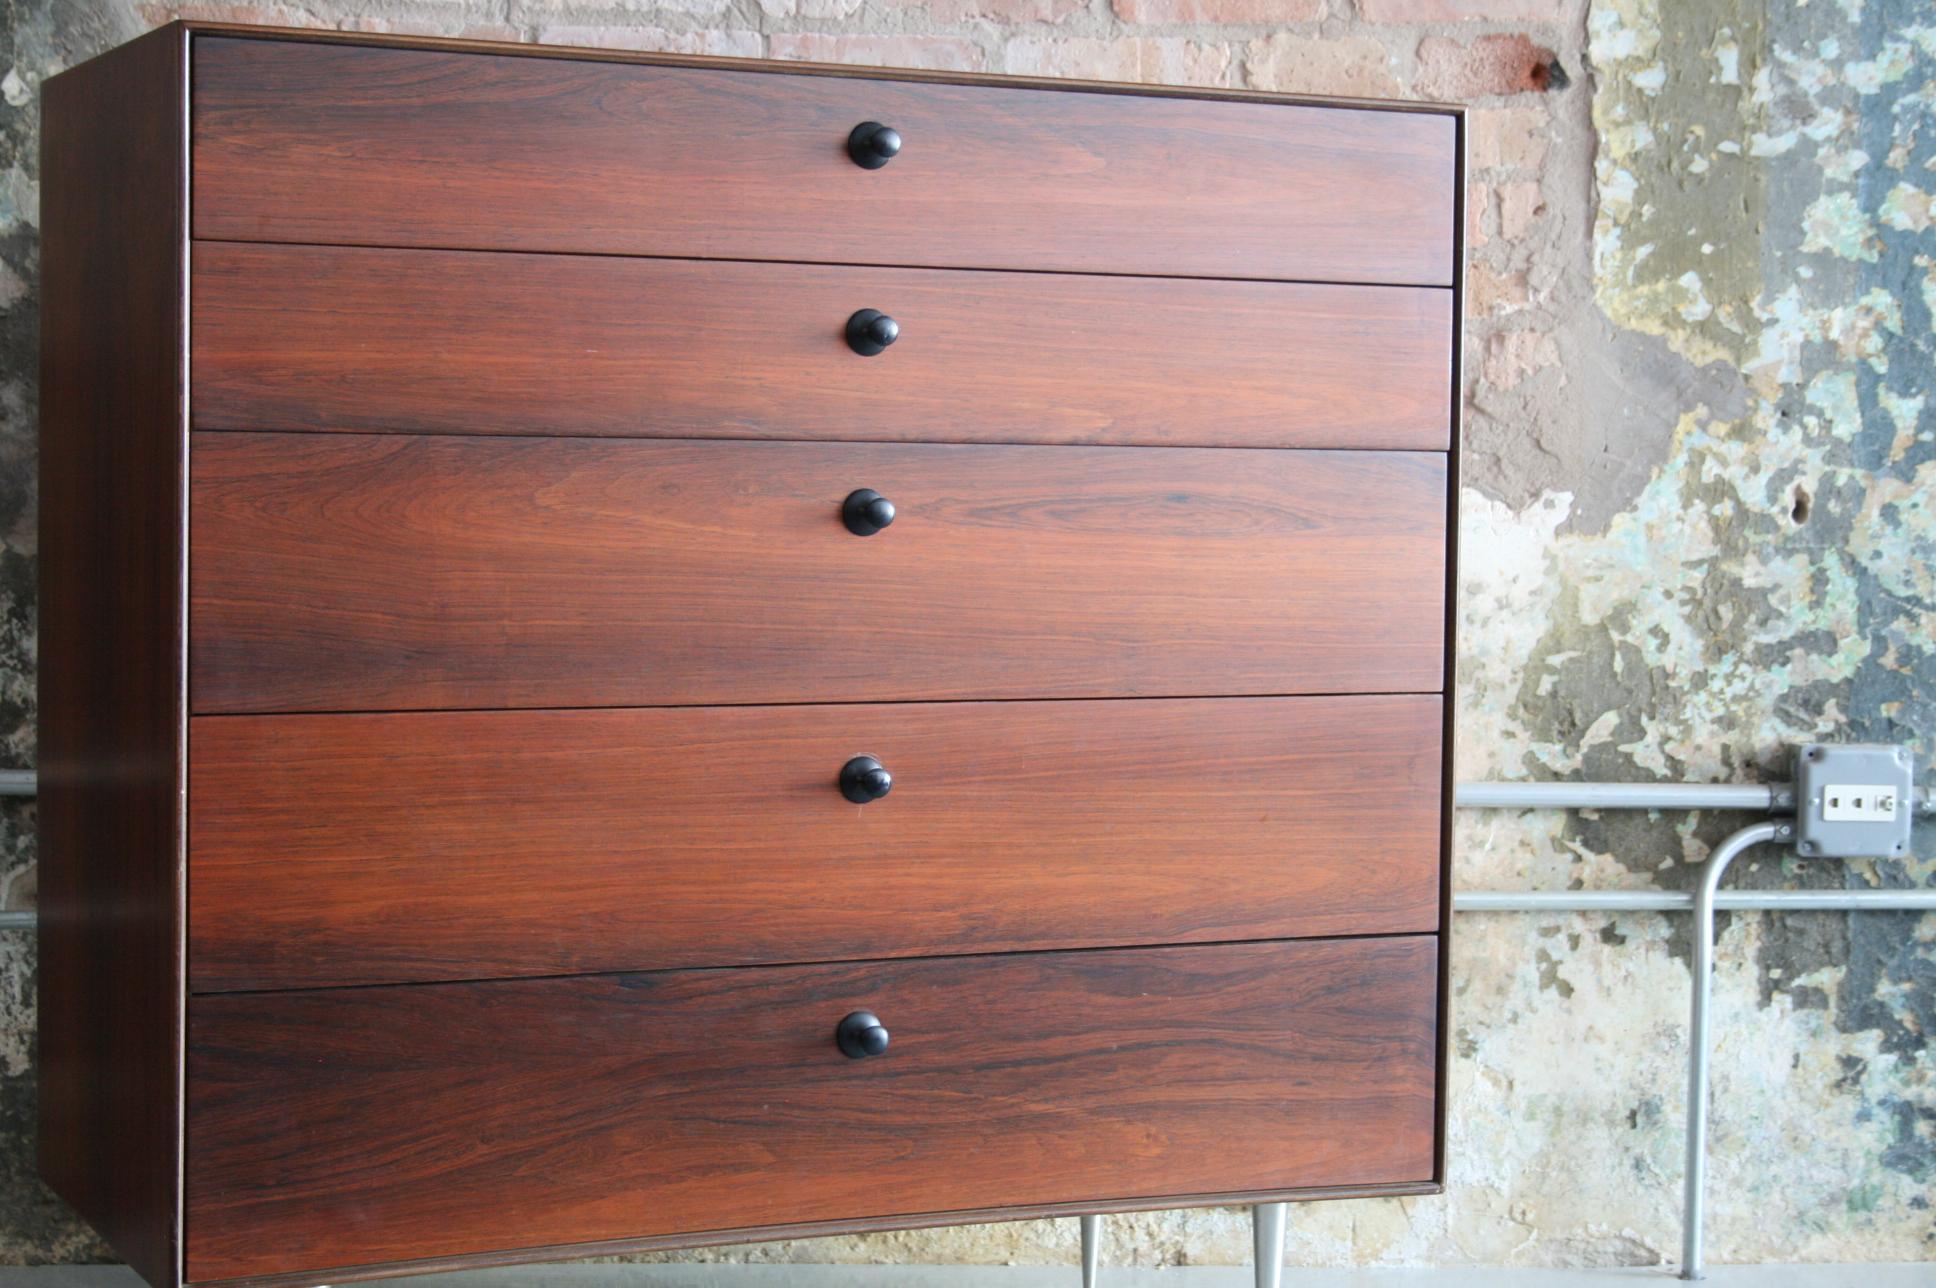 20th Century Original Rosewood Thin Edge Series Dresser by George Nelson for Herman Miller